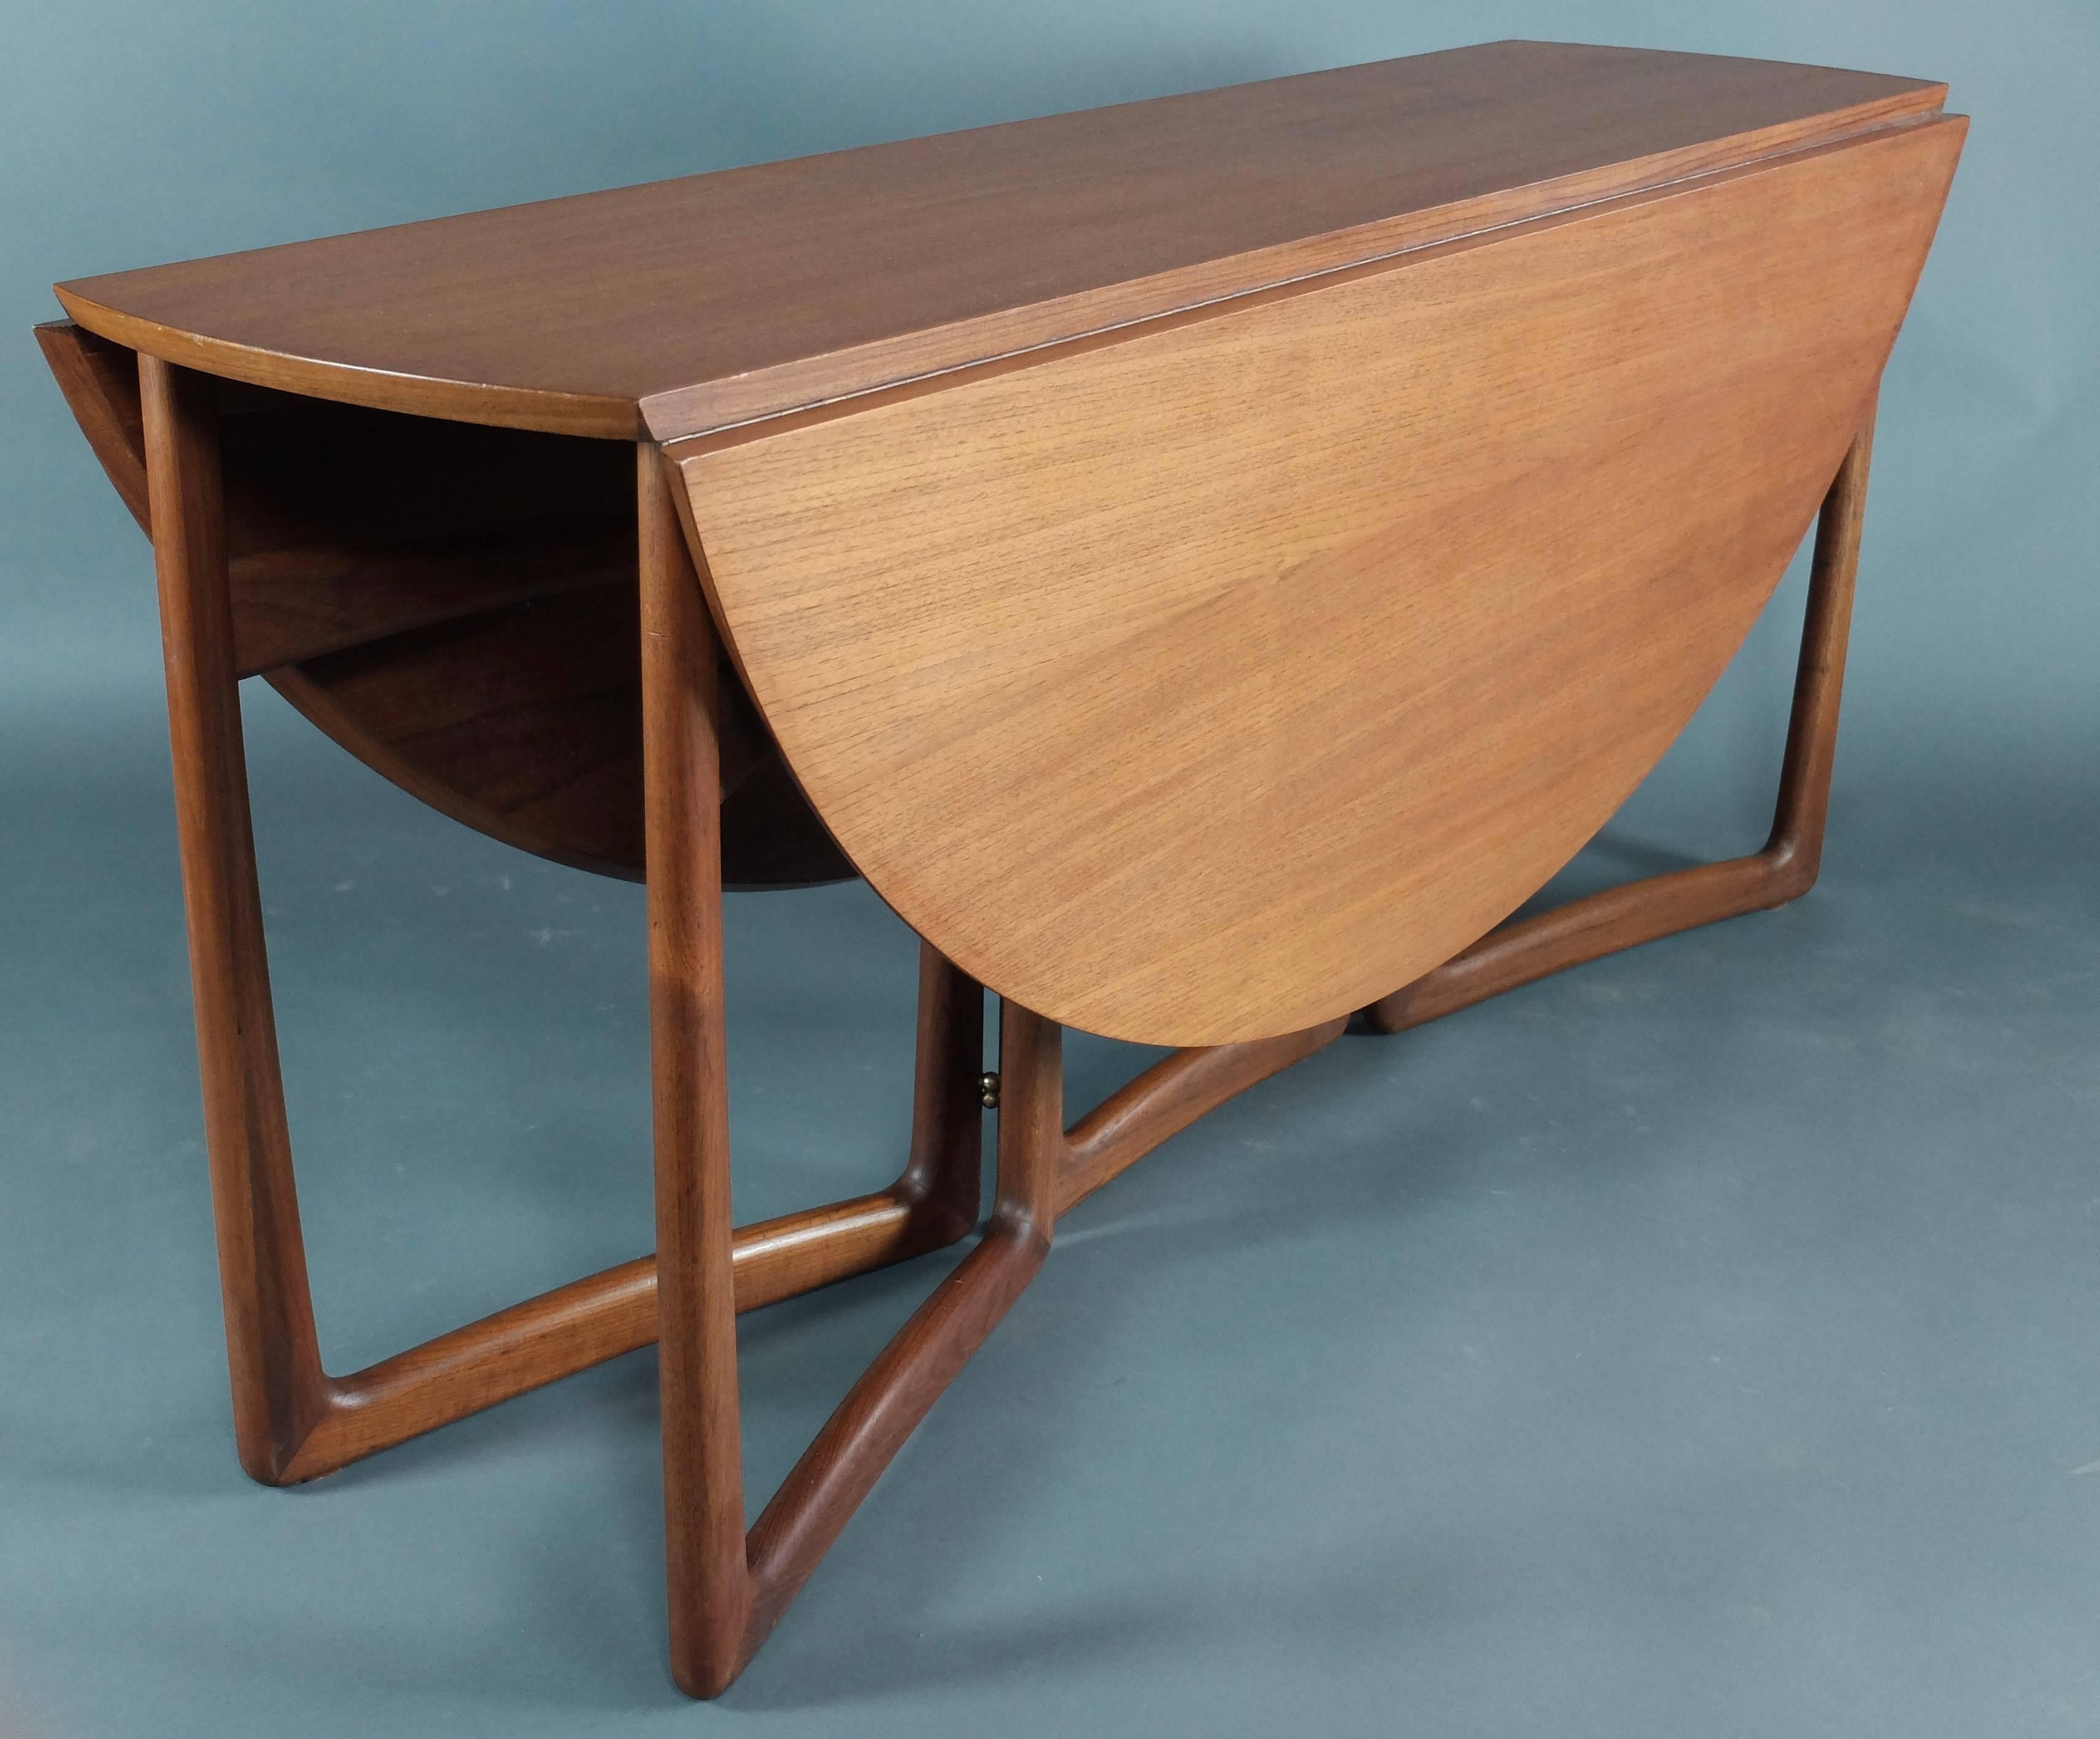 This Mid-Century dining table was designed by Peter Hvidt & Orla Molgaard Nielsen for France & Søn and manufactured in Denmark in the 1960s. This piece is made from teak with original sculptured legs, and features two extending drop leaves.